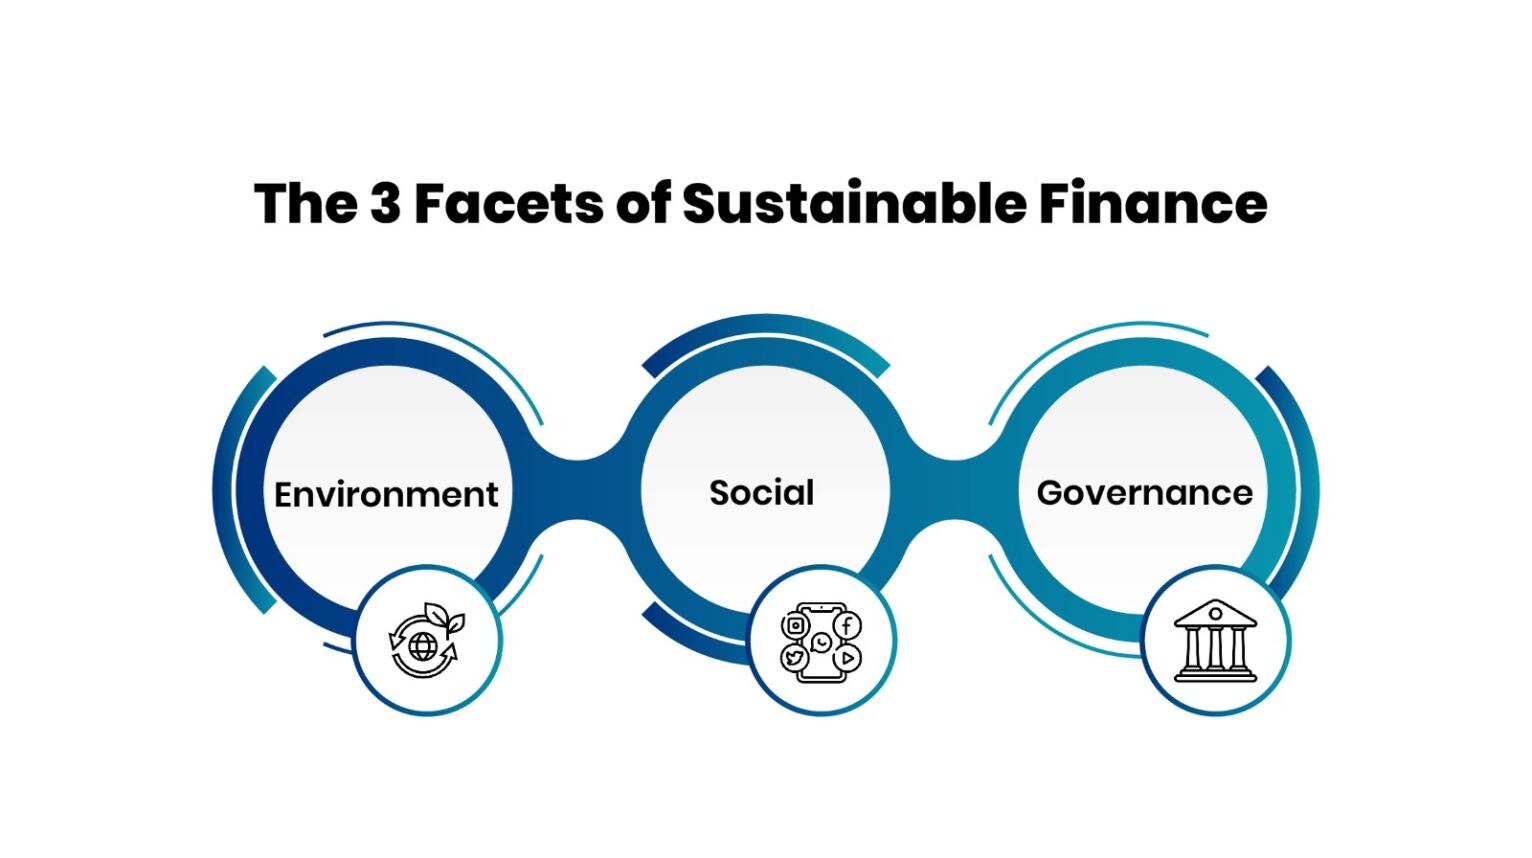 The 3 Facets of Sustainable Finance